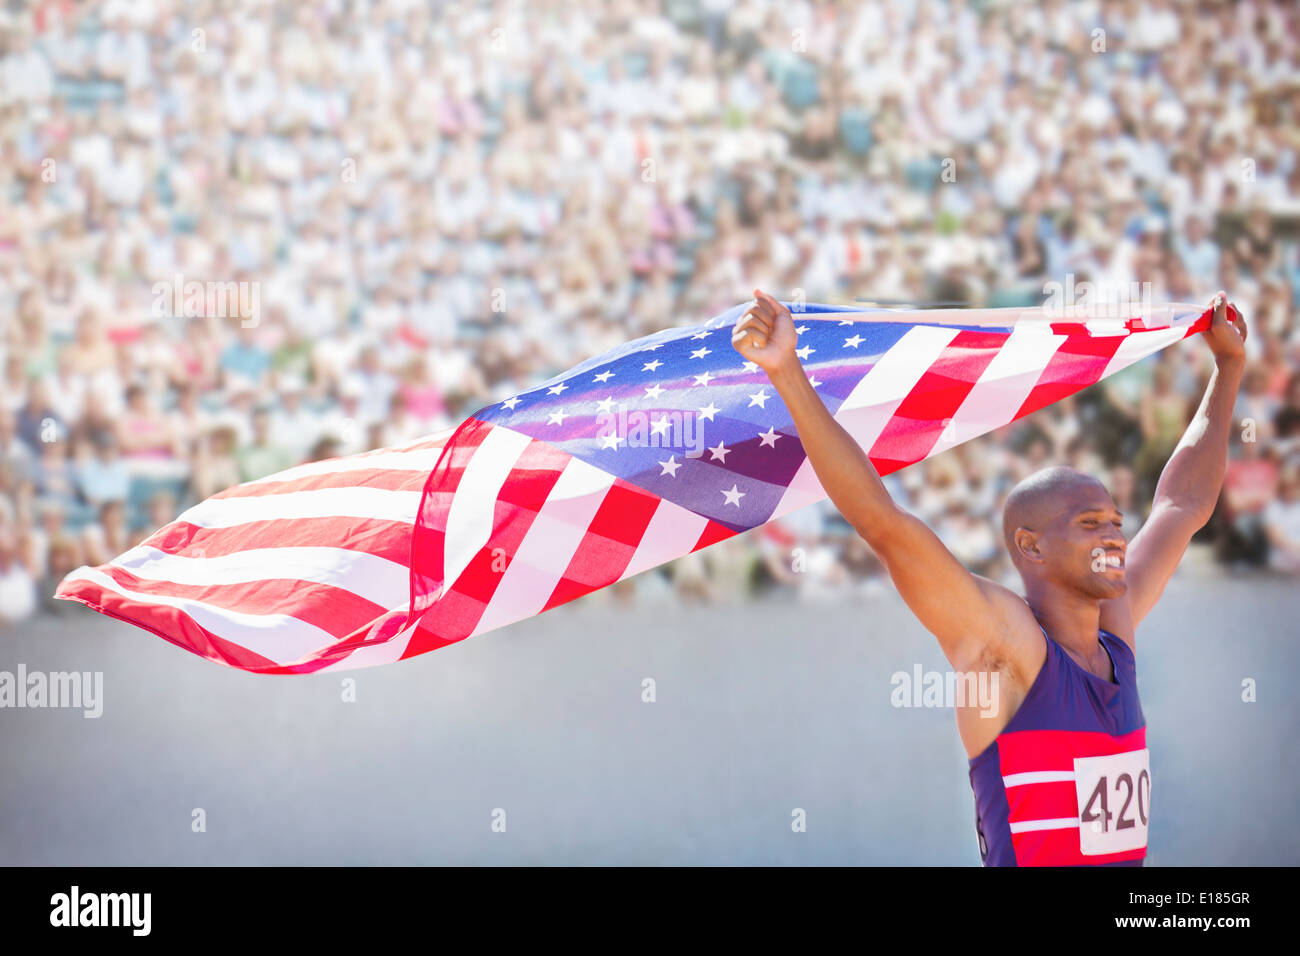 Track and field athlete holding American flag in stadium Stock Photo